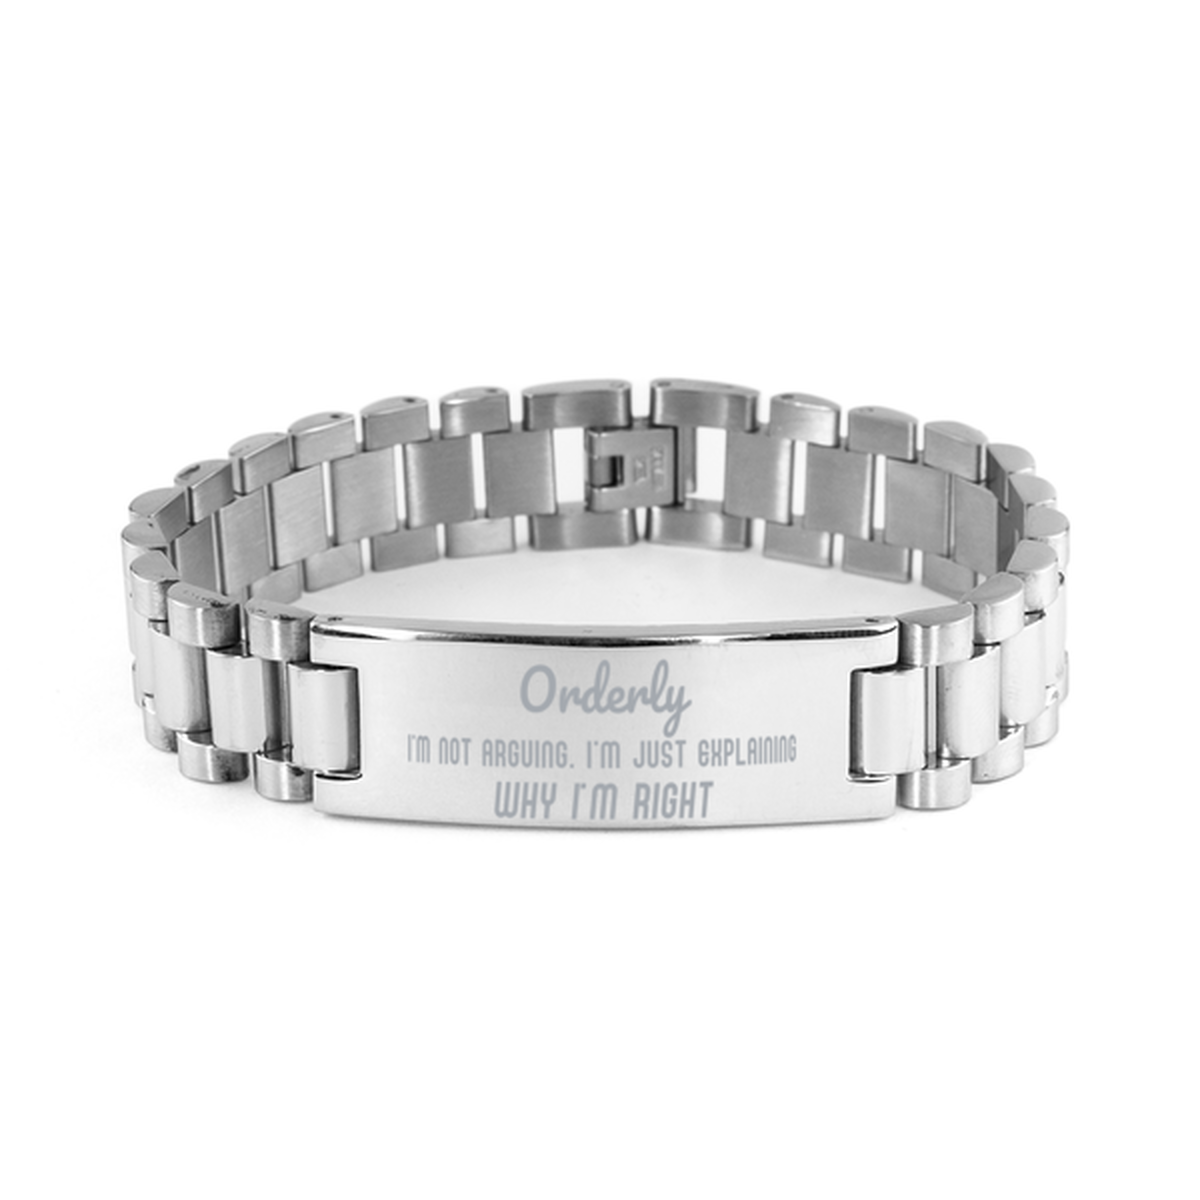 Orderly I'm not Arguing. I'm Just Explaining Why I'm RIGHT Ladder Stainless Steel Bracelet, Graduation Birthday Christmas Orderly Gifts For Orderly Funny Saying Quote Present for Men Women Coworker